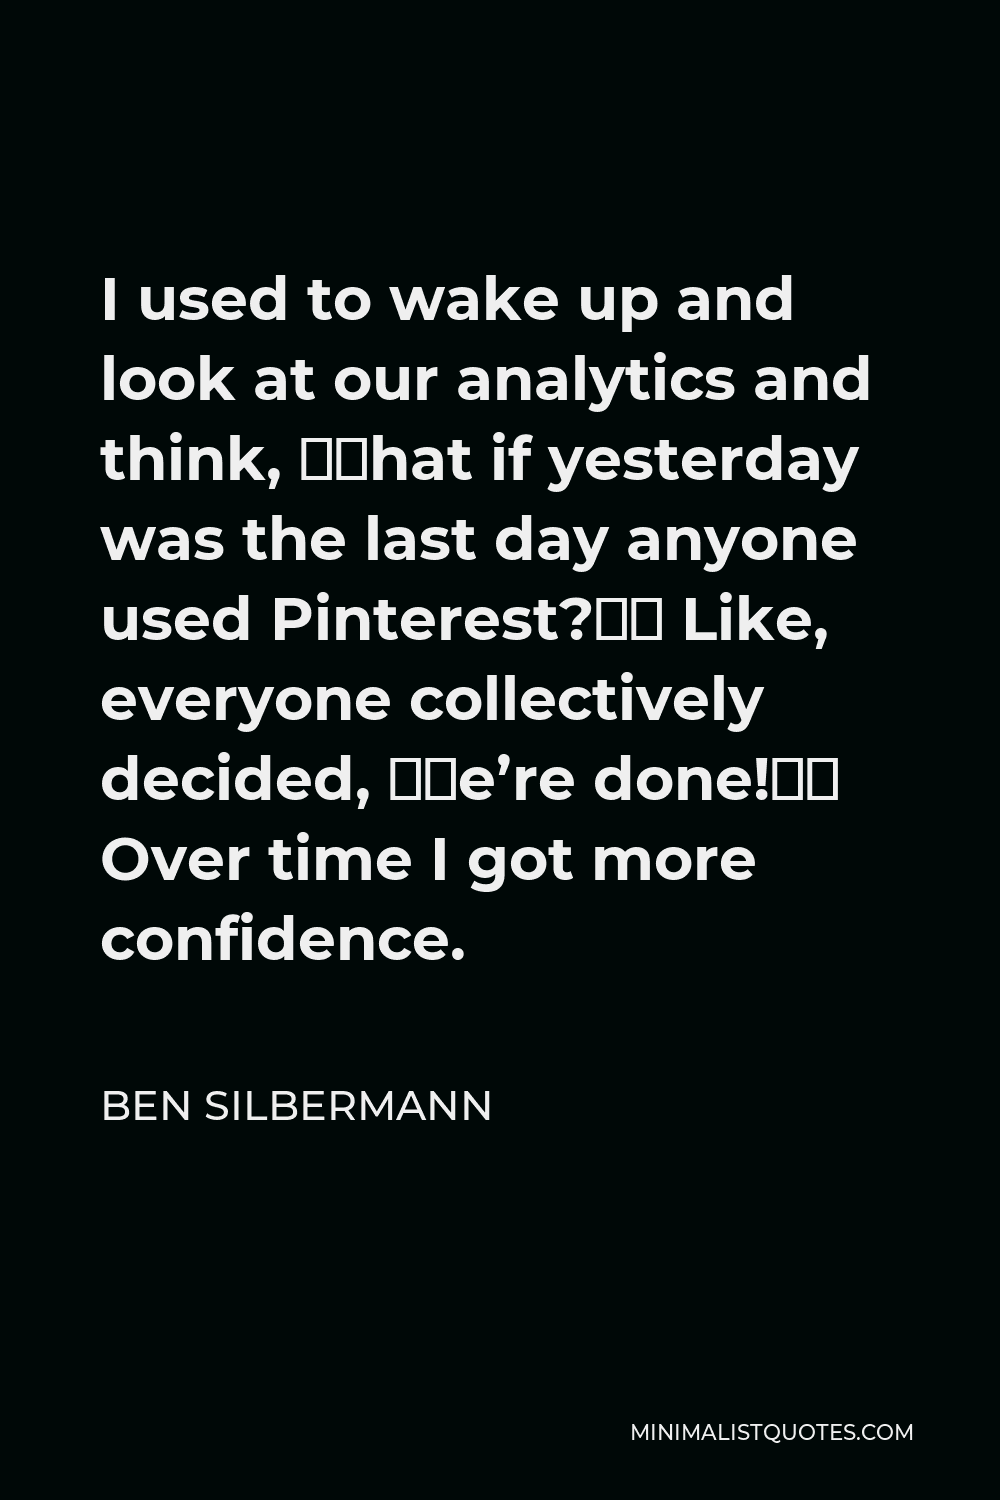 Ben Silbermann Quote - I used to wake up and look at our analytics and think, “What if yesterday was the last day anyone used Pinterest?” Like, everyone collectively decided, “We’re done!” Over time I got more confidence.